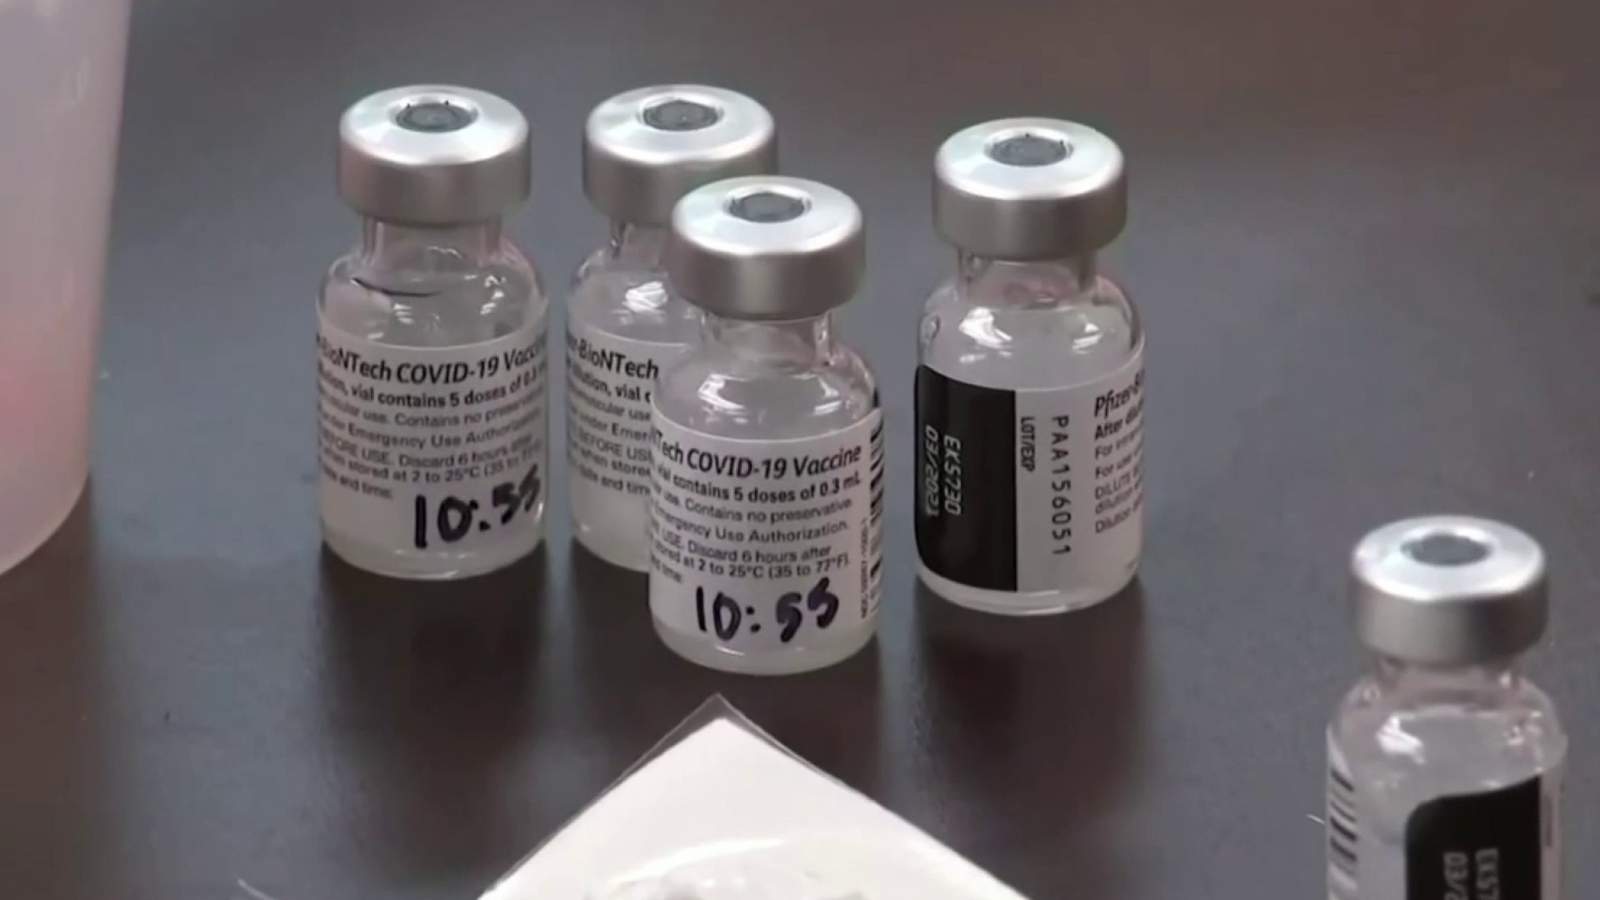 Federal officials increasing COVID-19 vaccine doses available for Michigan starting next week